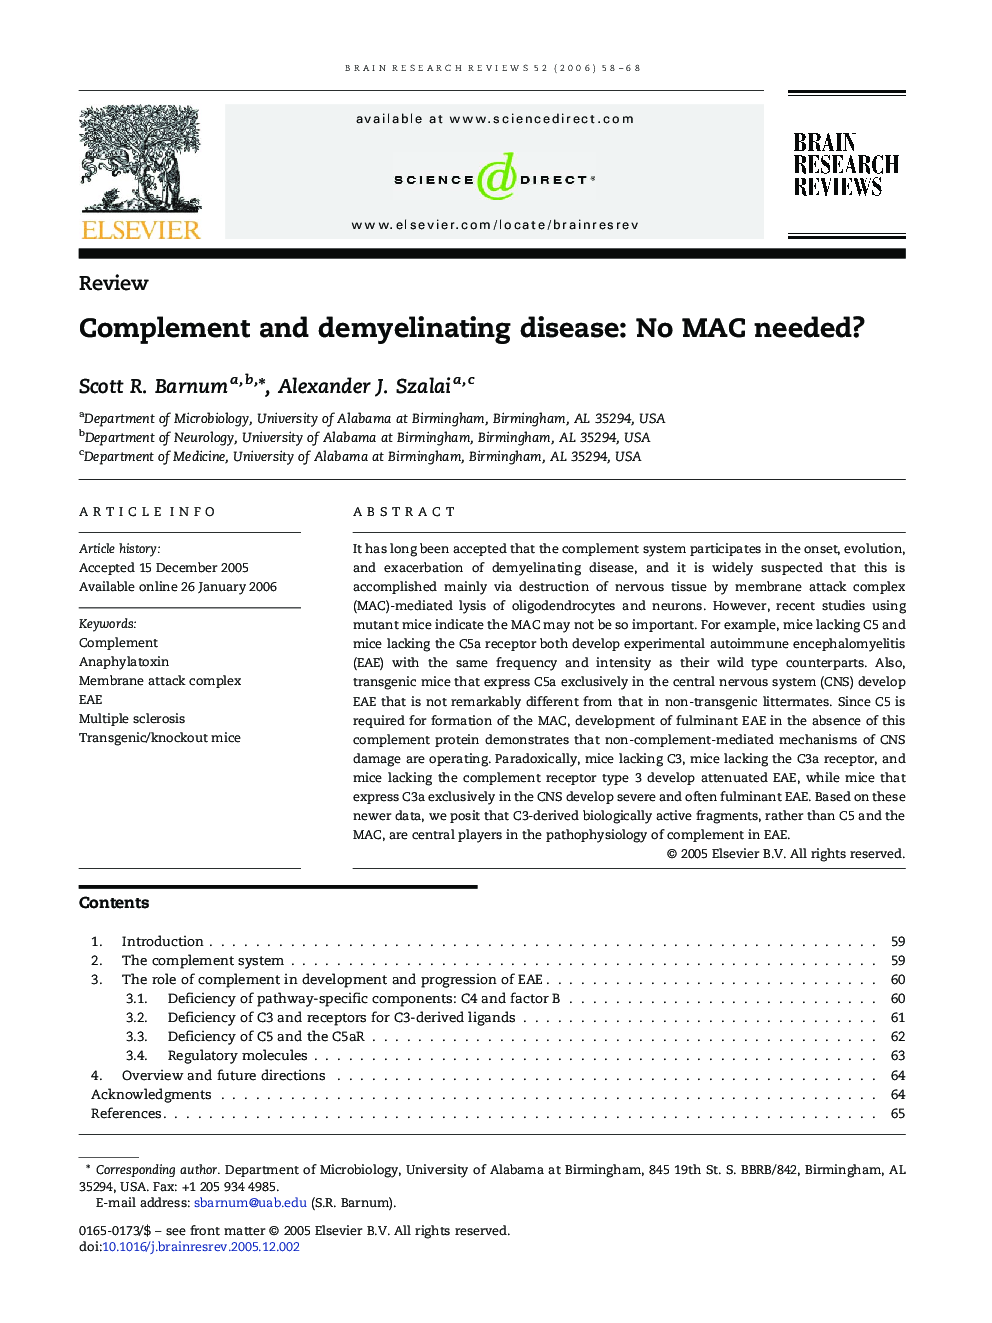 Complement and demyelinating disease: No MAC needed?